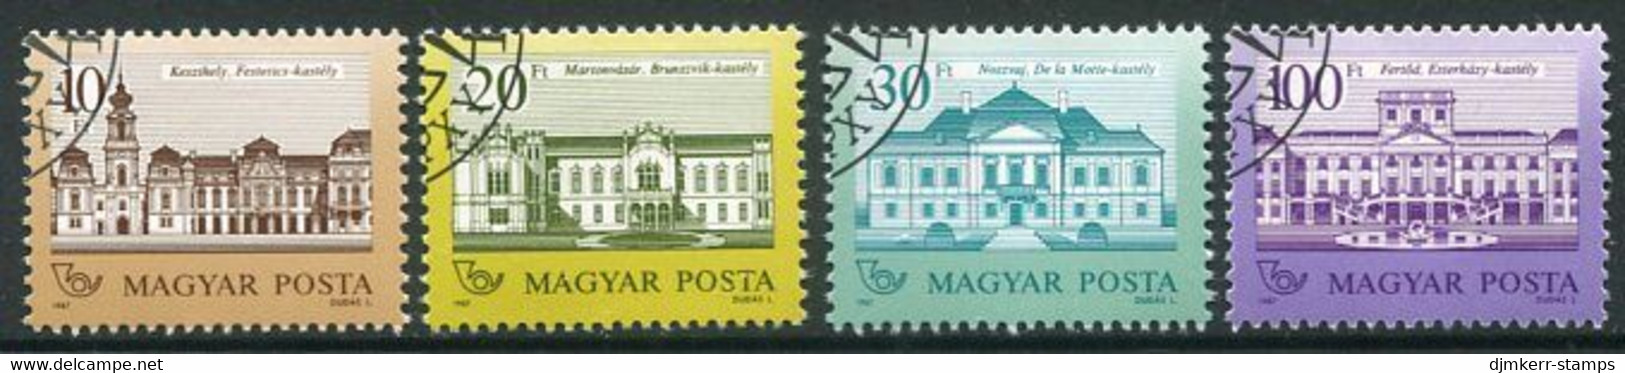 HUNGARY 1987 Definitive 10, 20, 30, 100 Ft. Used.  Michel 3901-04 - Gebraucht